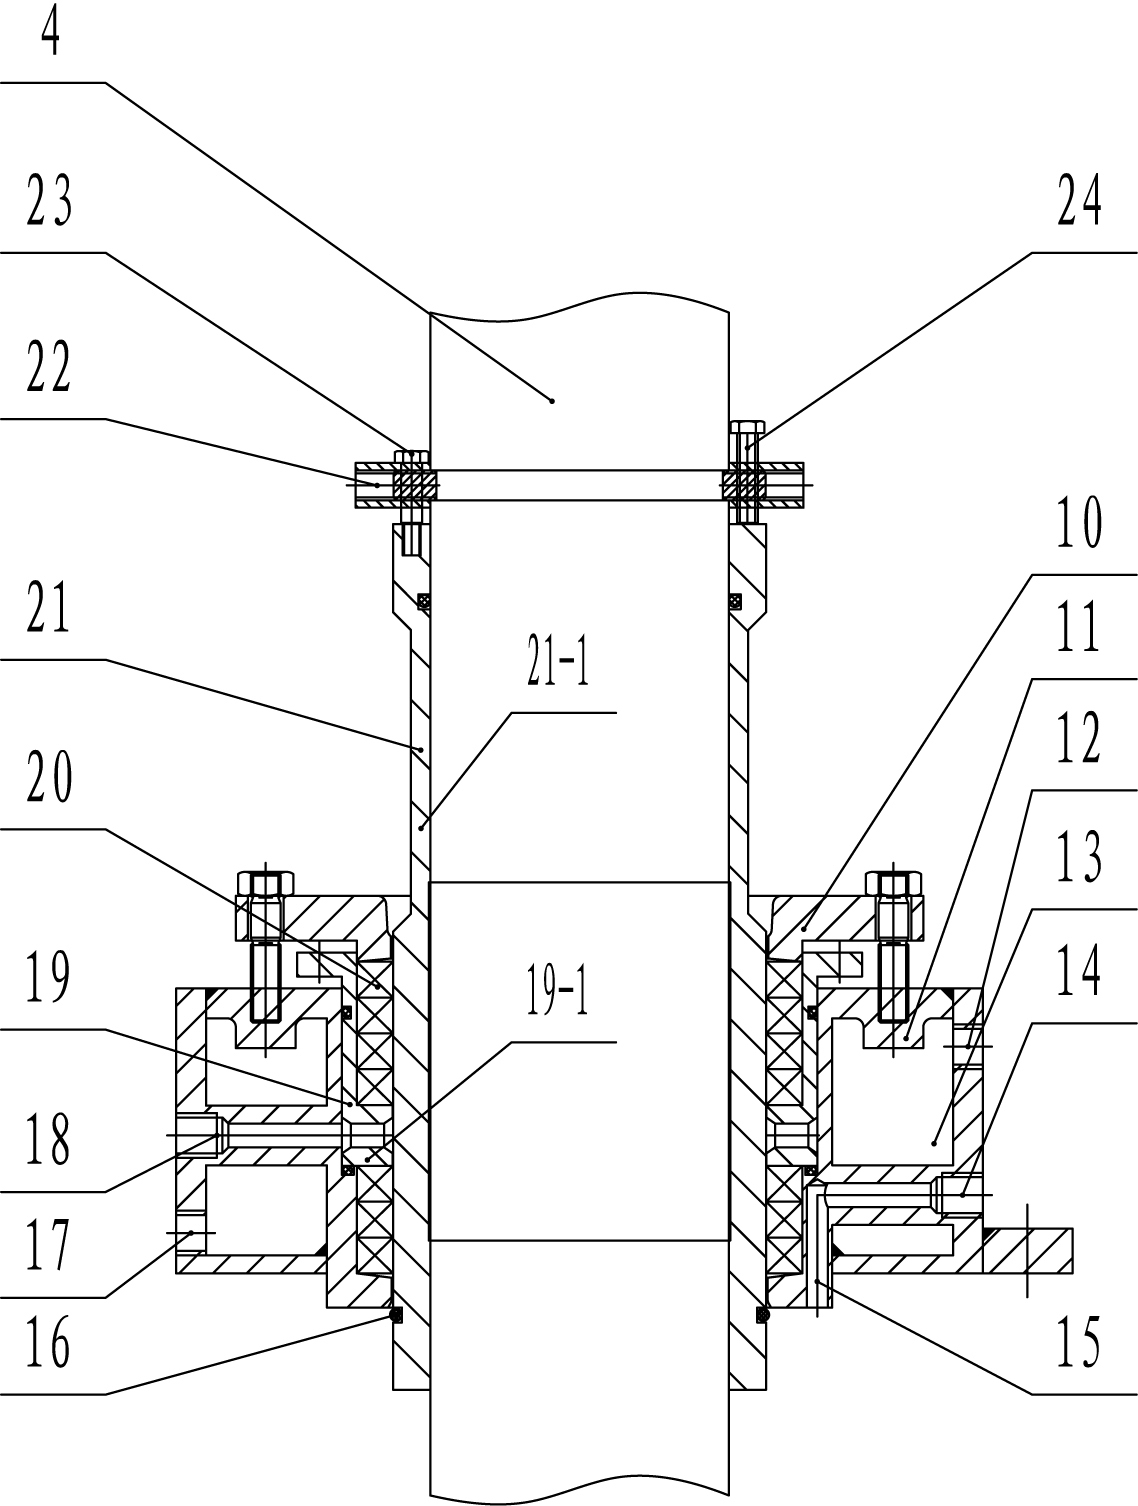 Improved submerged pump for conveying titanium tetrachloride